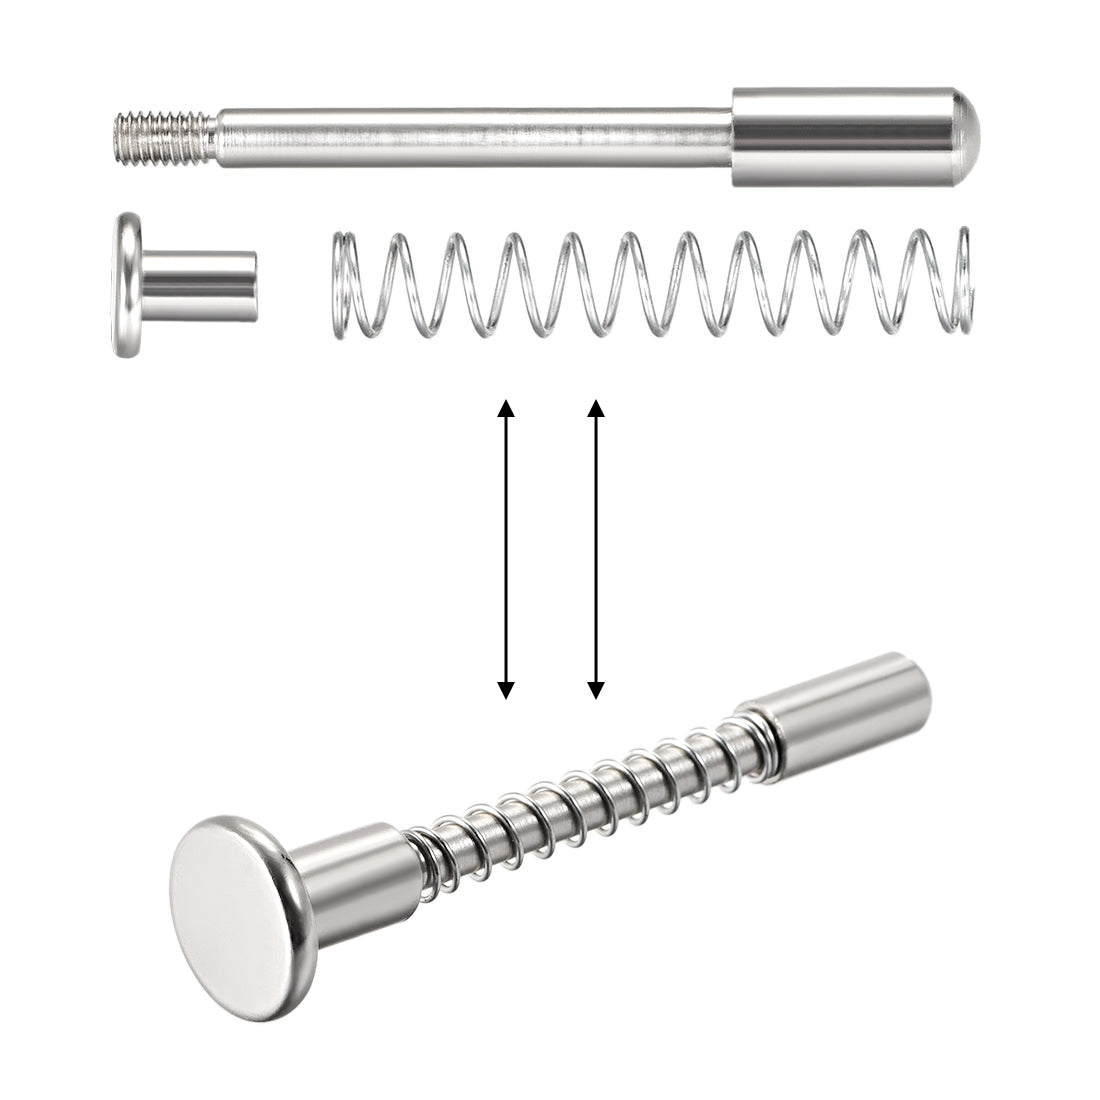 uxcell Uxcell Plunger Latches Spring Loaded Stainless Steel 7mm Dia Head 6mm Dia Spring 70mm Total Length , 2pcs